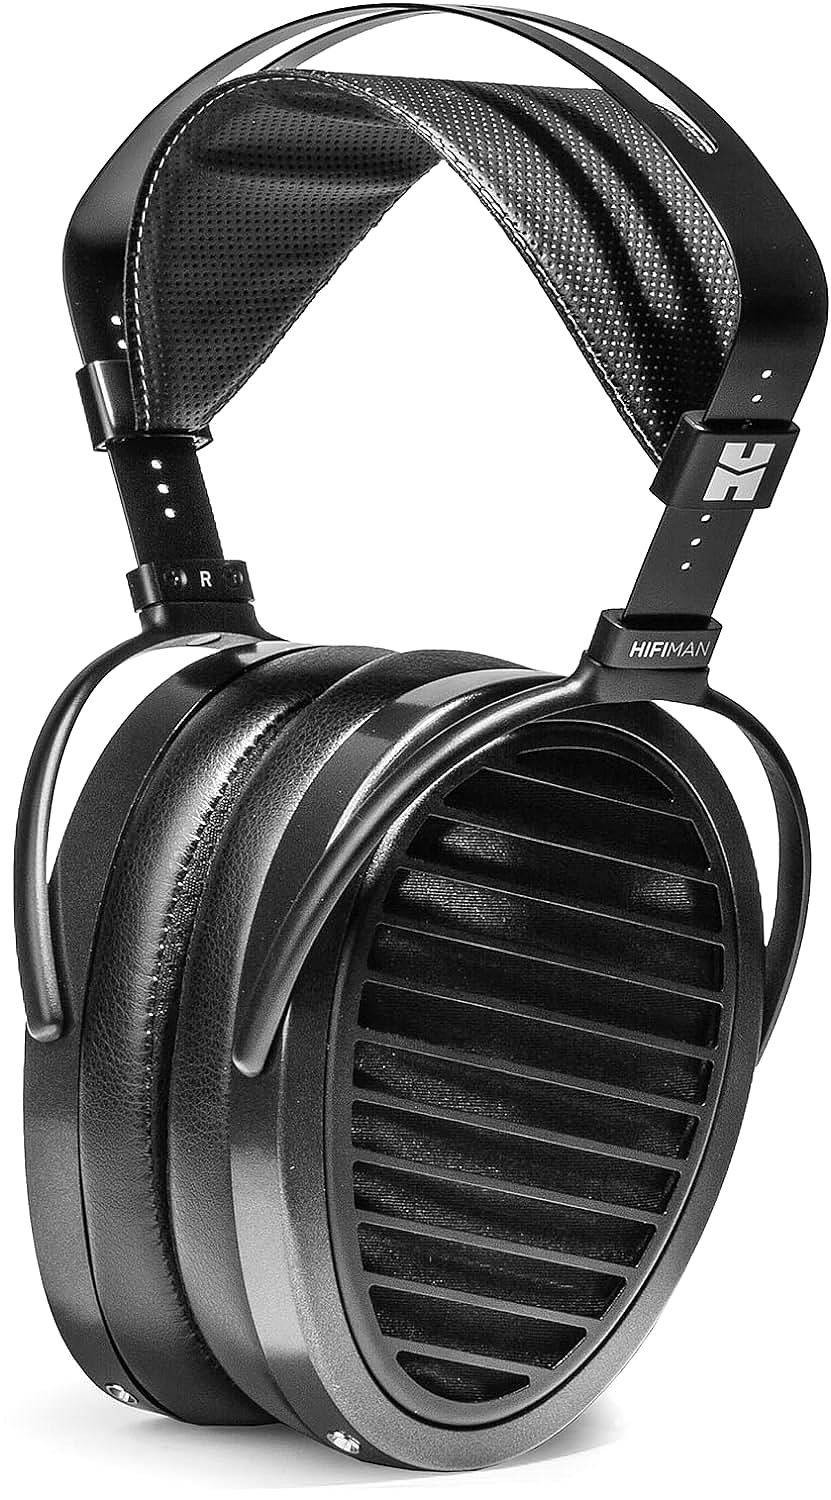 HIFIMAN Arya Stealth Magnet Version Full-Size Over-Ear Planar Magnetic Headphone - Top-Tier Open-Back Headphones Made for Audiophiles and Studio Use